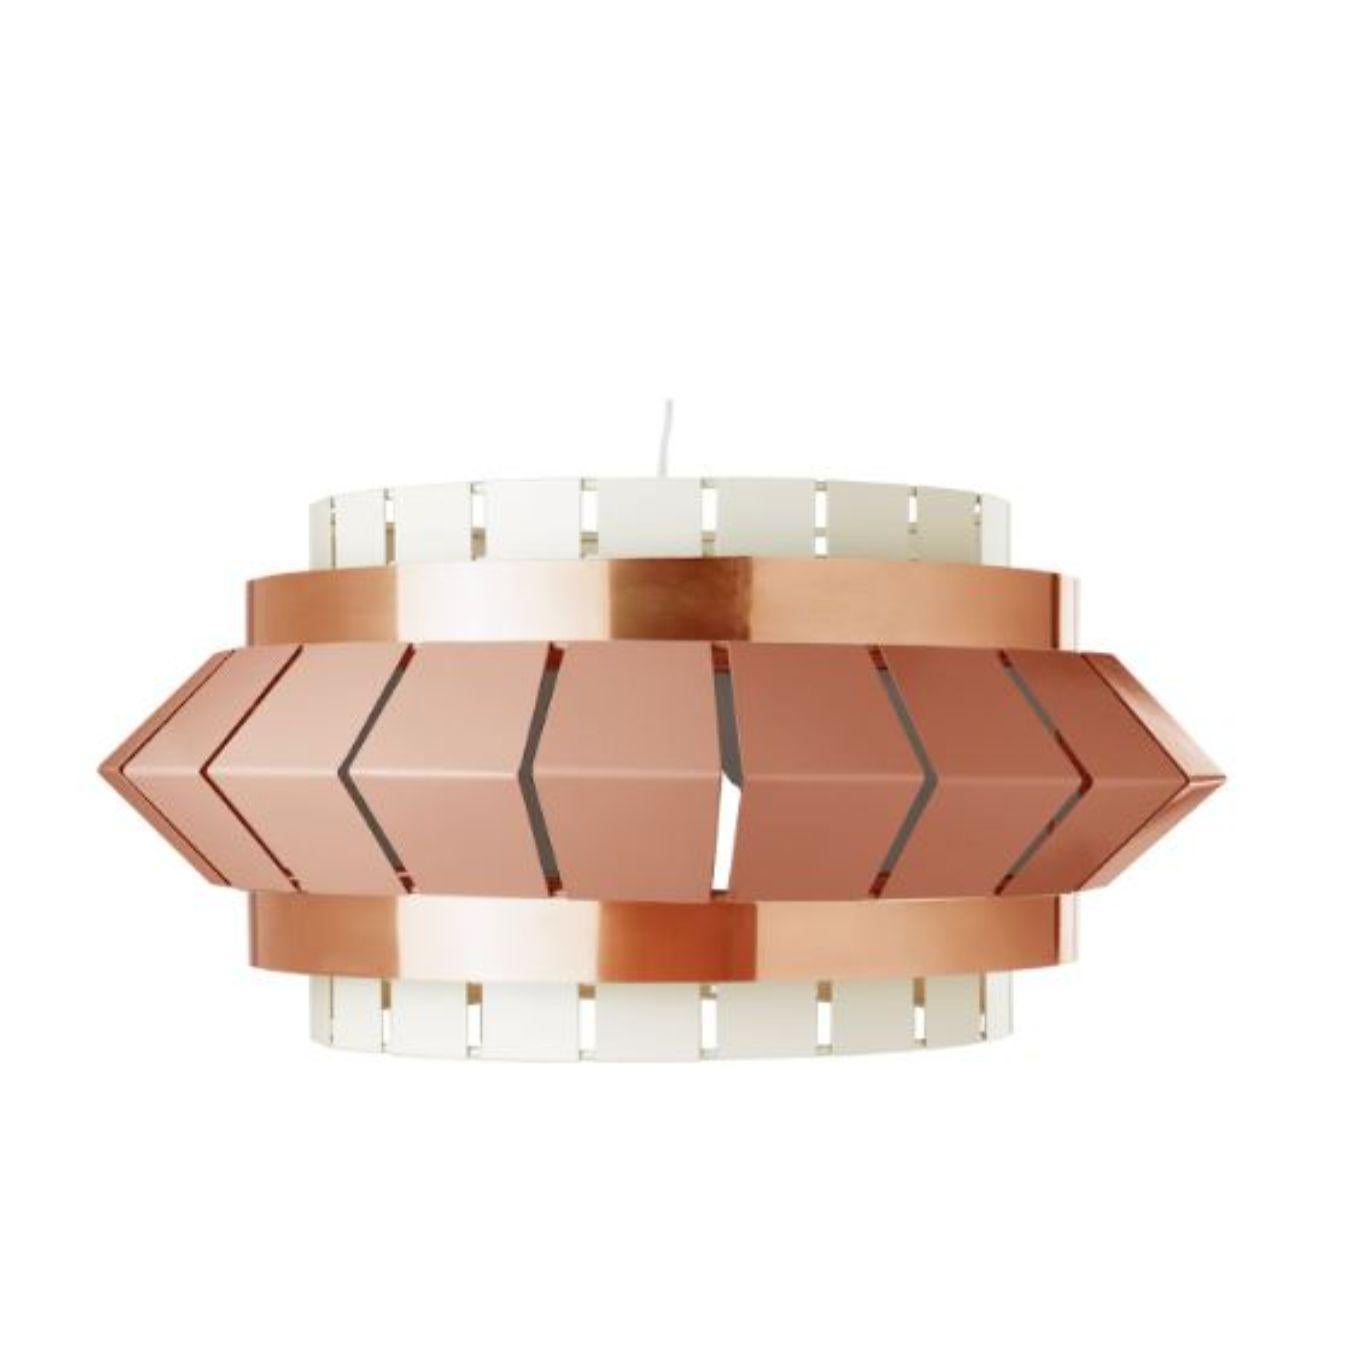 Metal Dream and Ivory Comb I Suspension Lamp with Copper Ring by Dooq For Sale